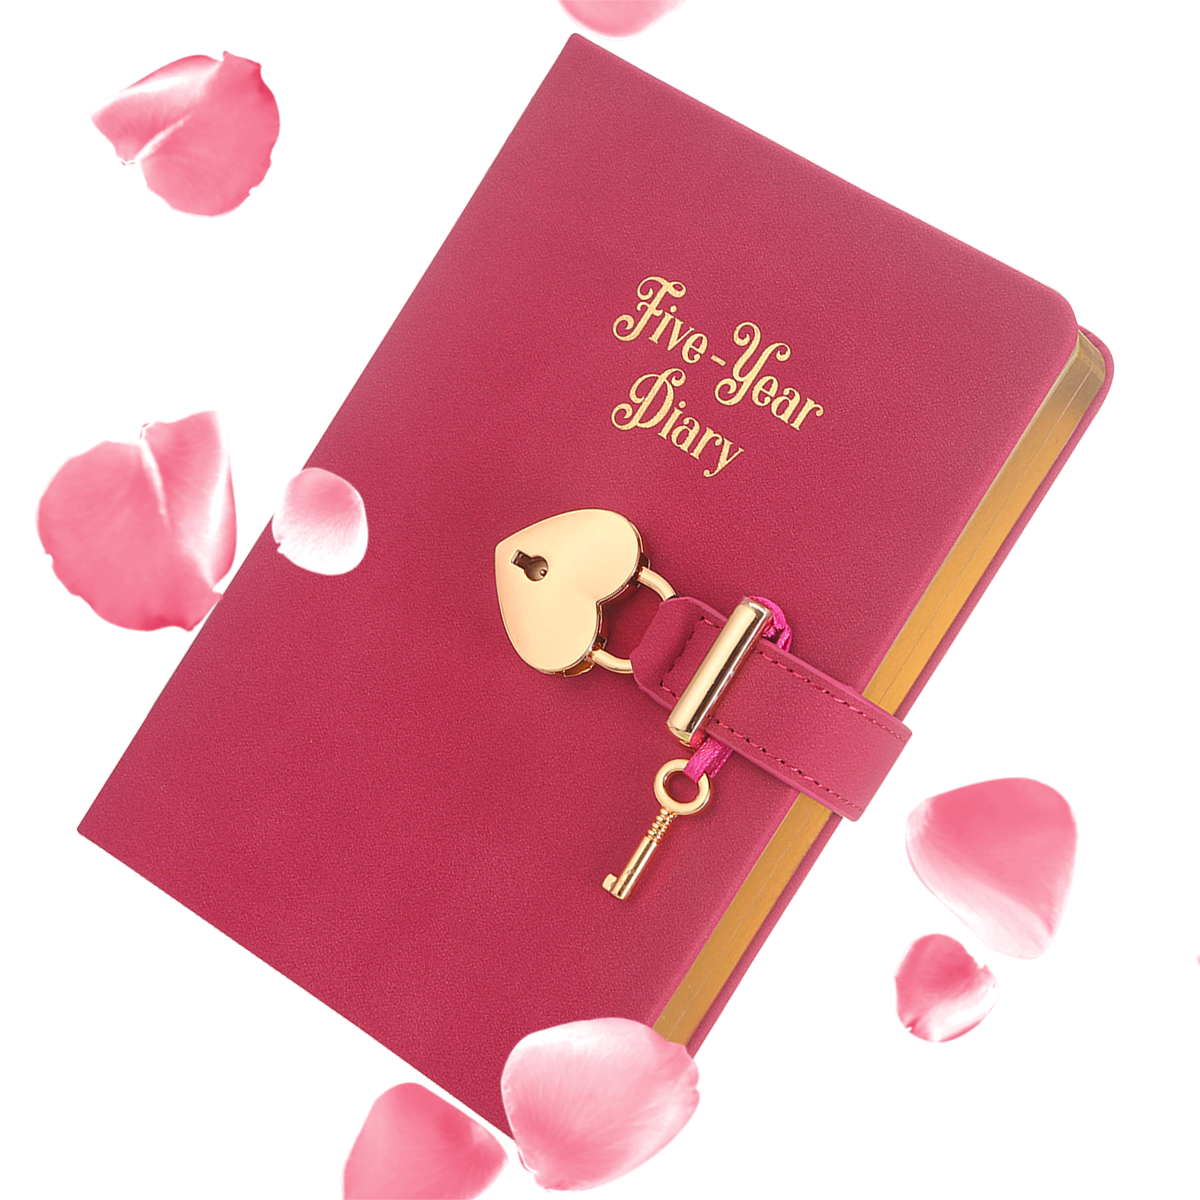 5 Year Diary for Women and Girls: Five-Year Happiness, Memory and Daily Journal with Heart Lock - 4.7x6.5", 394pages (Hot Pink)